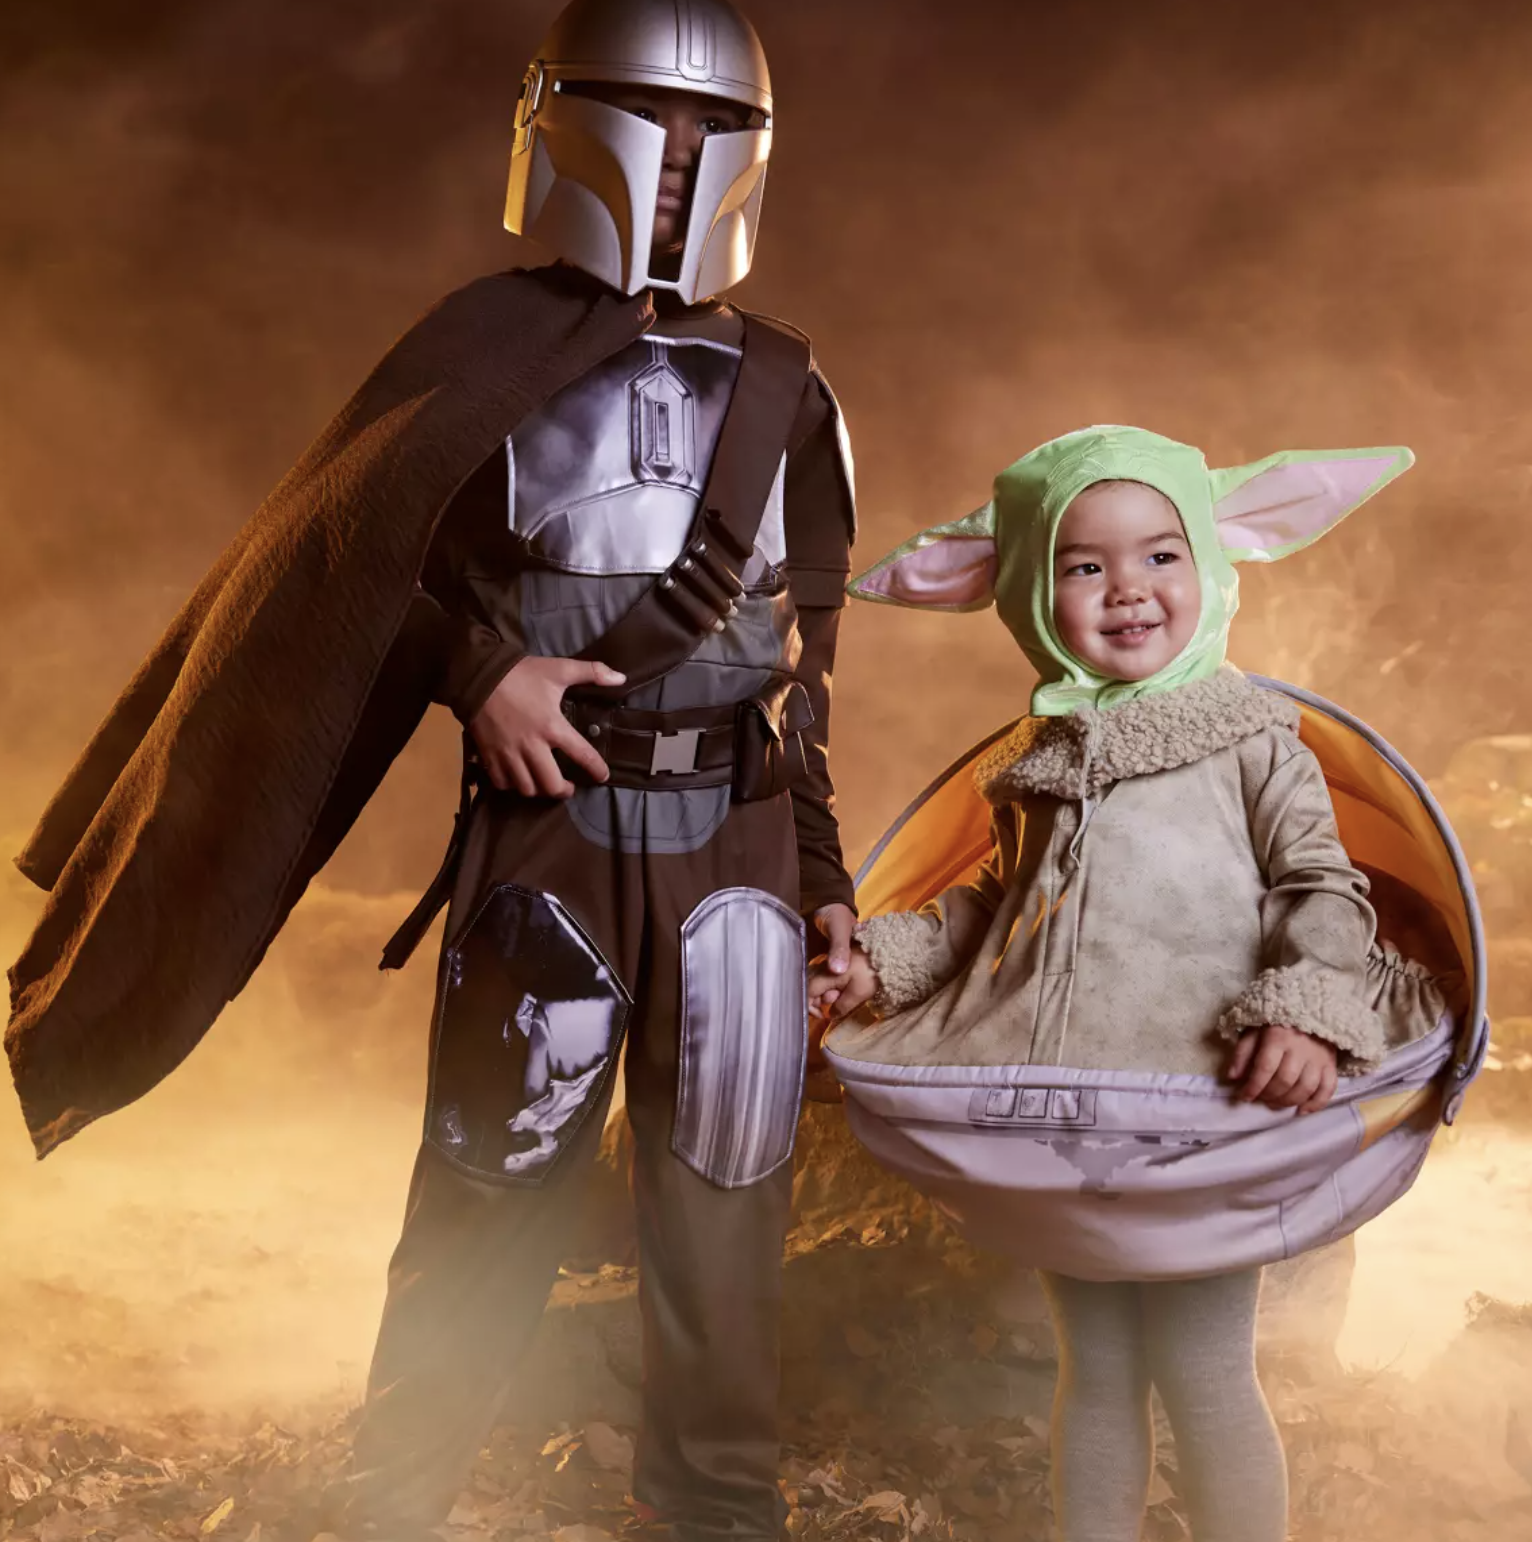 One child in a Mandalorian costume and the other in a Grogu costume